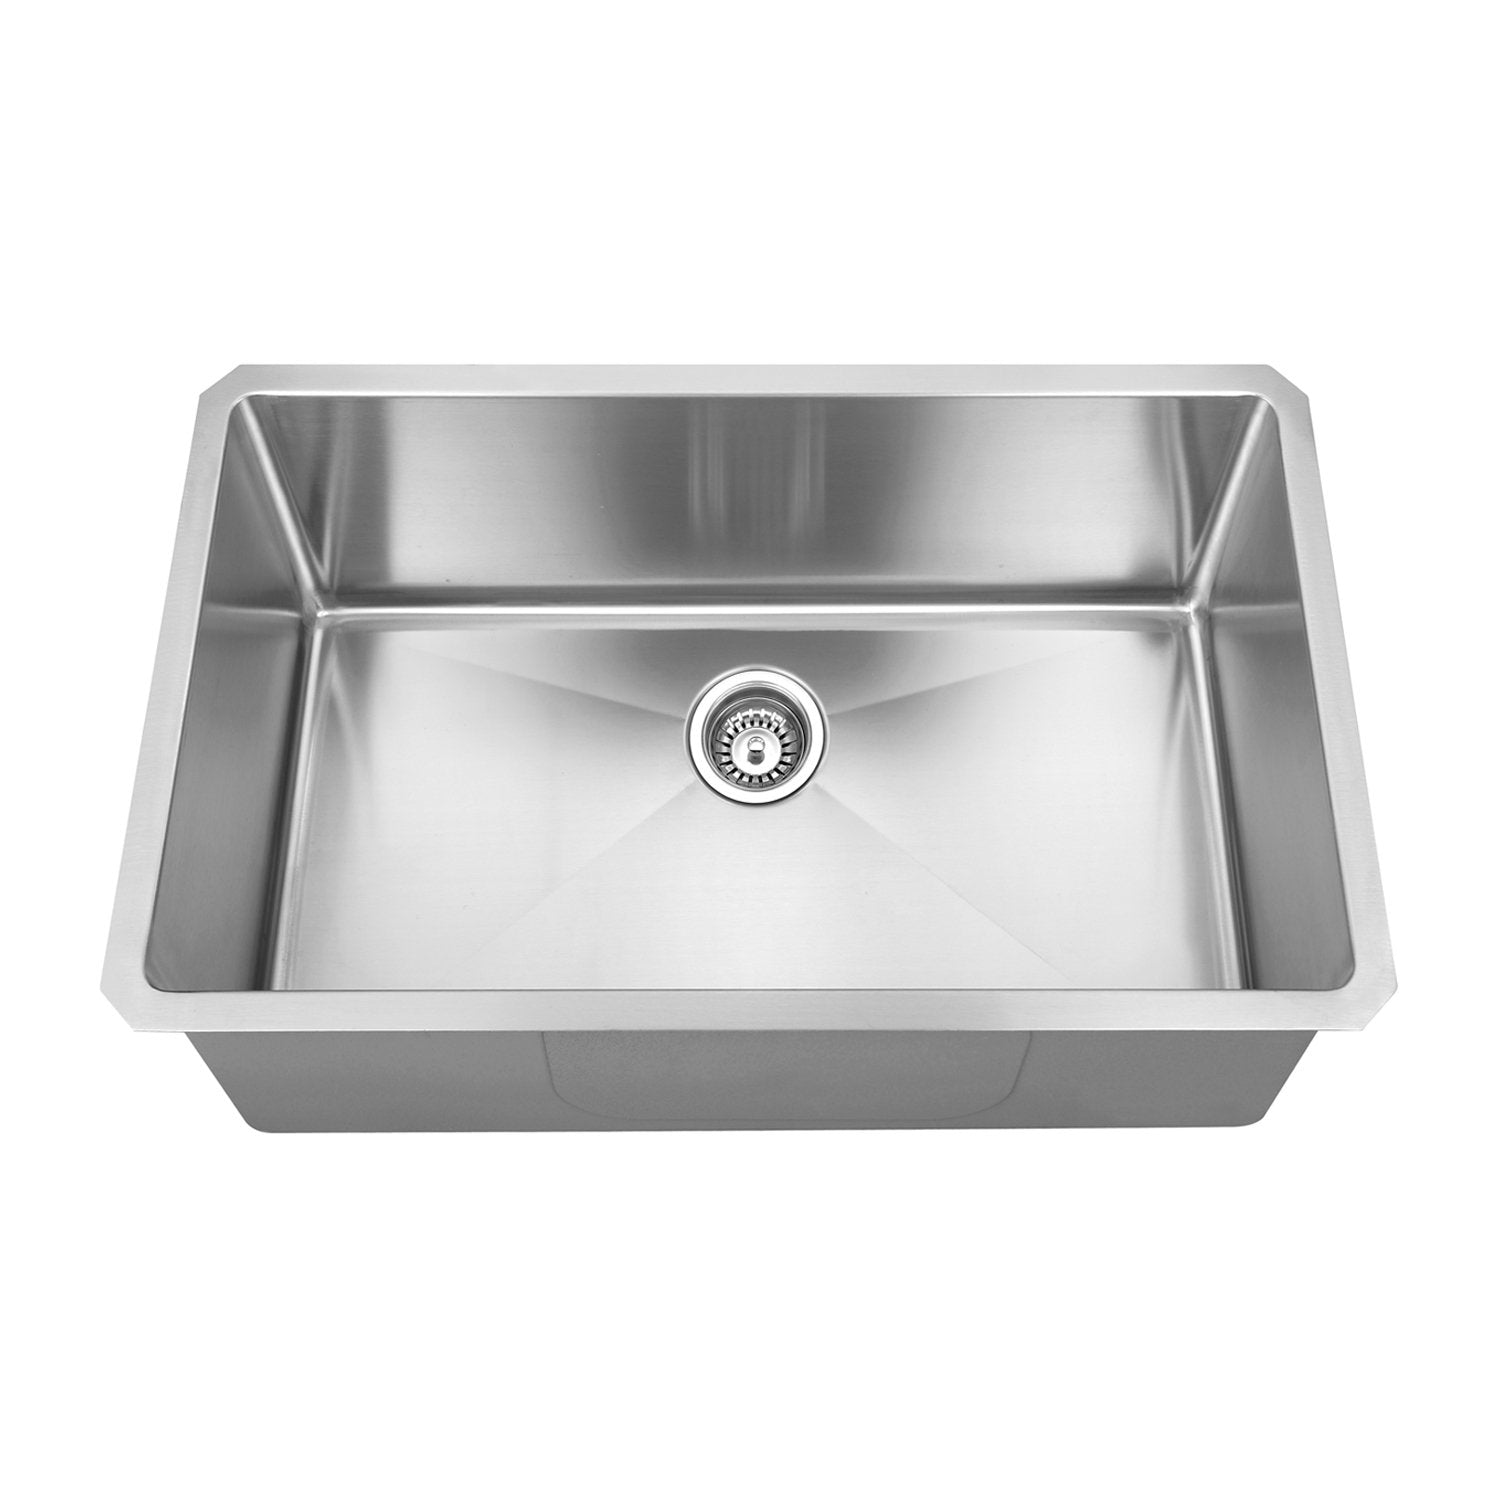 DAX Handmade R10 Single Bowl Undermount Kitchen Sink, 18 Gauge Stainless Steel, Brushed Finish, 29 x 18 x 10 Inches (KA-2818R10)